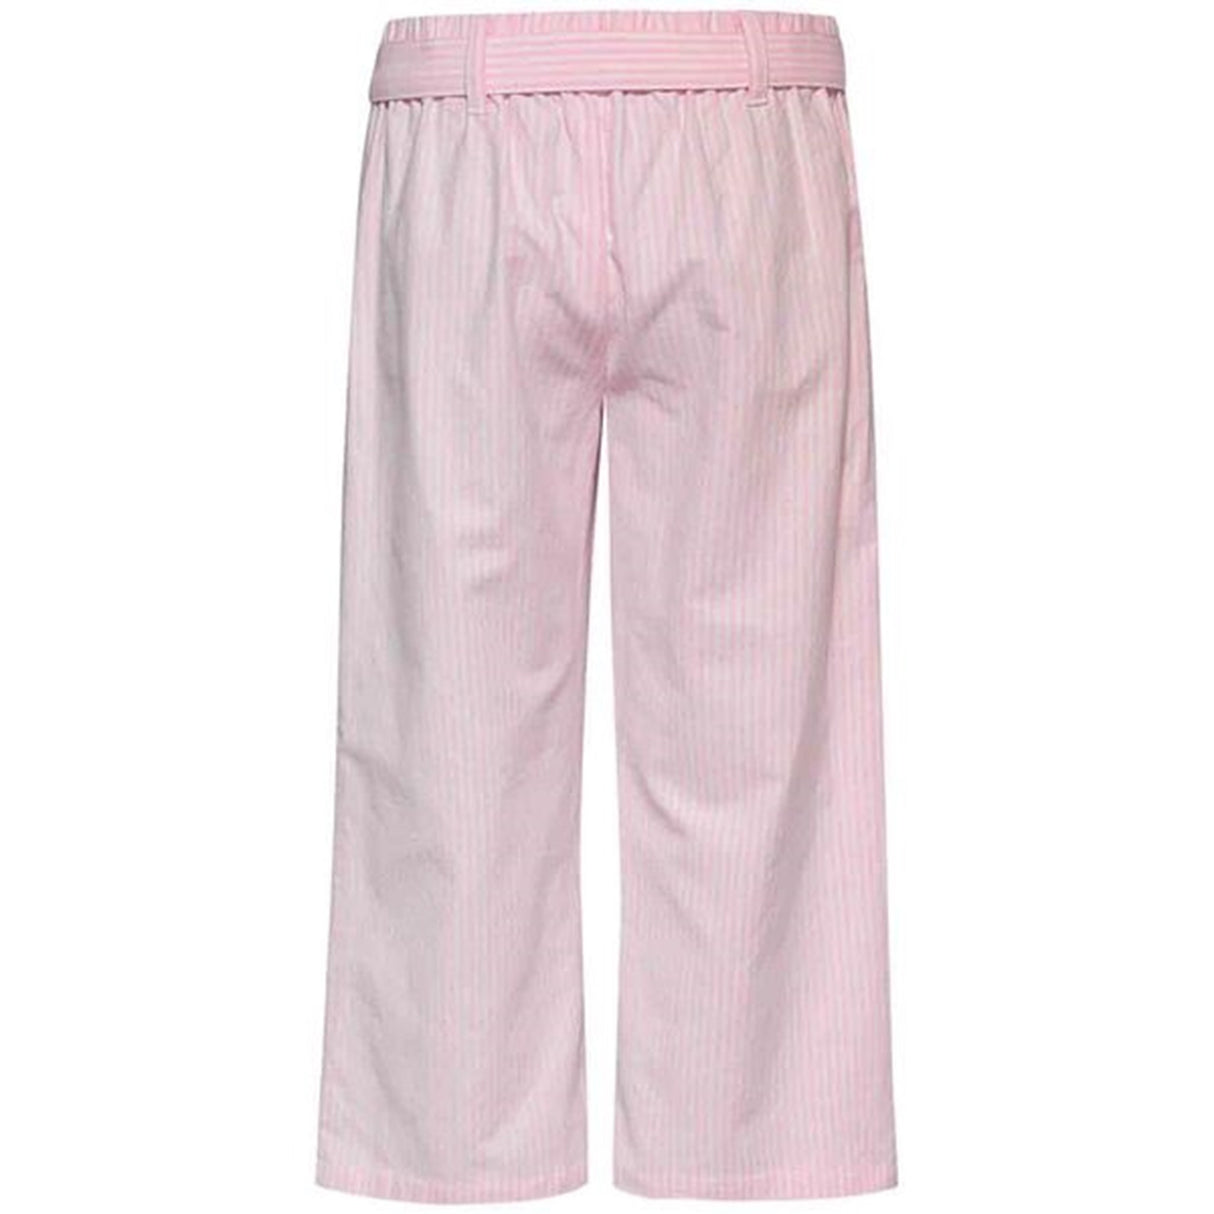 Tommy Hilfiger Neon Ithaca Stripe Pants Cotton Candy 2